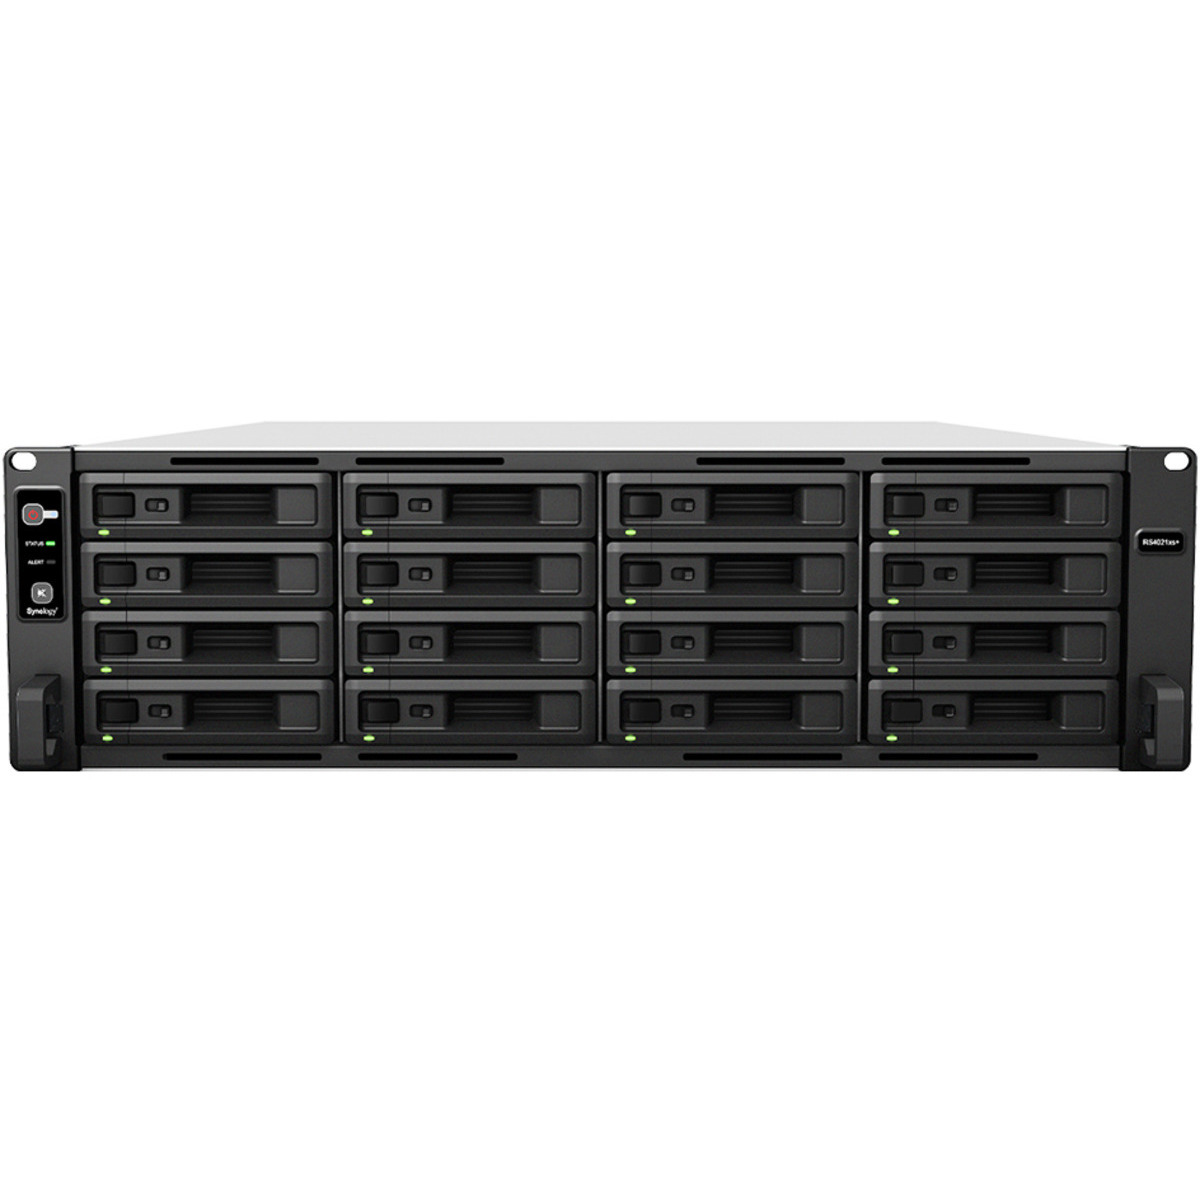 buy Synology RackStation RS4021xs+ 128tb RackMount NAS - Network Attached Storage Device 16x8000gb Seagate IronWolf Pro ST8000NT001 3.5 7200rpm SATA 6Gb/s HDD NAS Class Drives Installed - Burn-In Tested - ON SALE - nas headquarters buy network attached storage server device das new raid-5 free shipping simply usa RackStation RS4021xs+